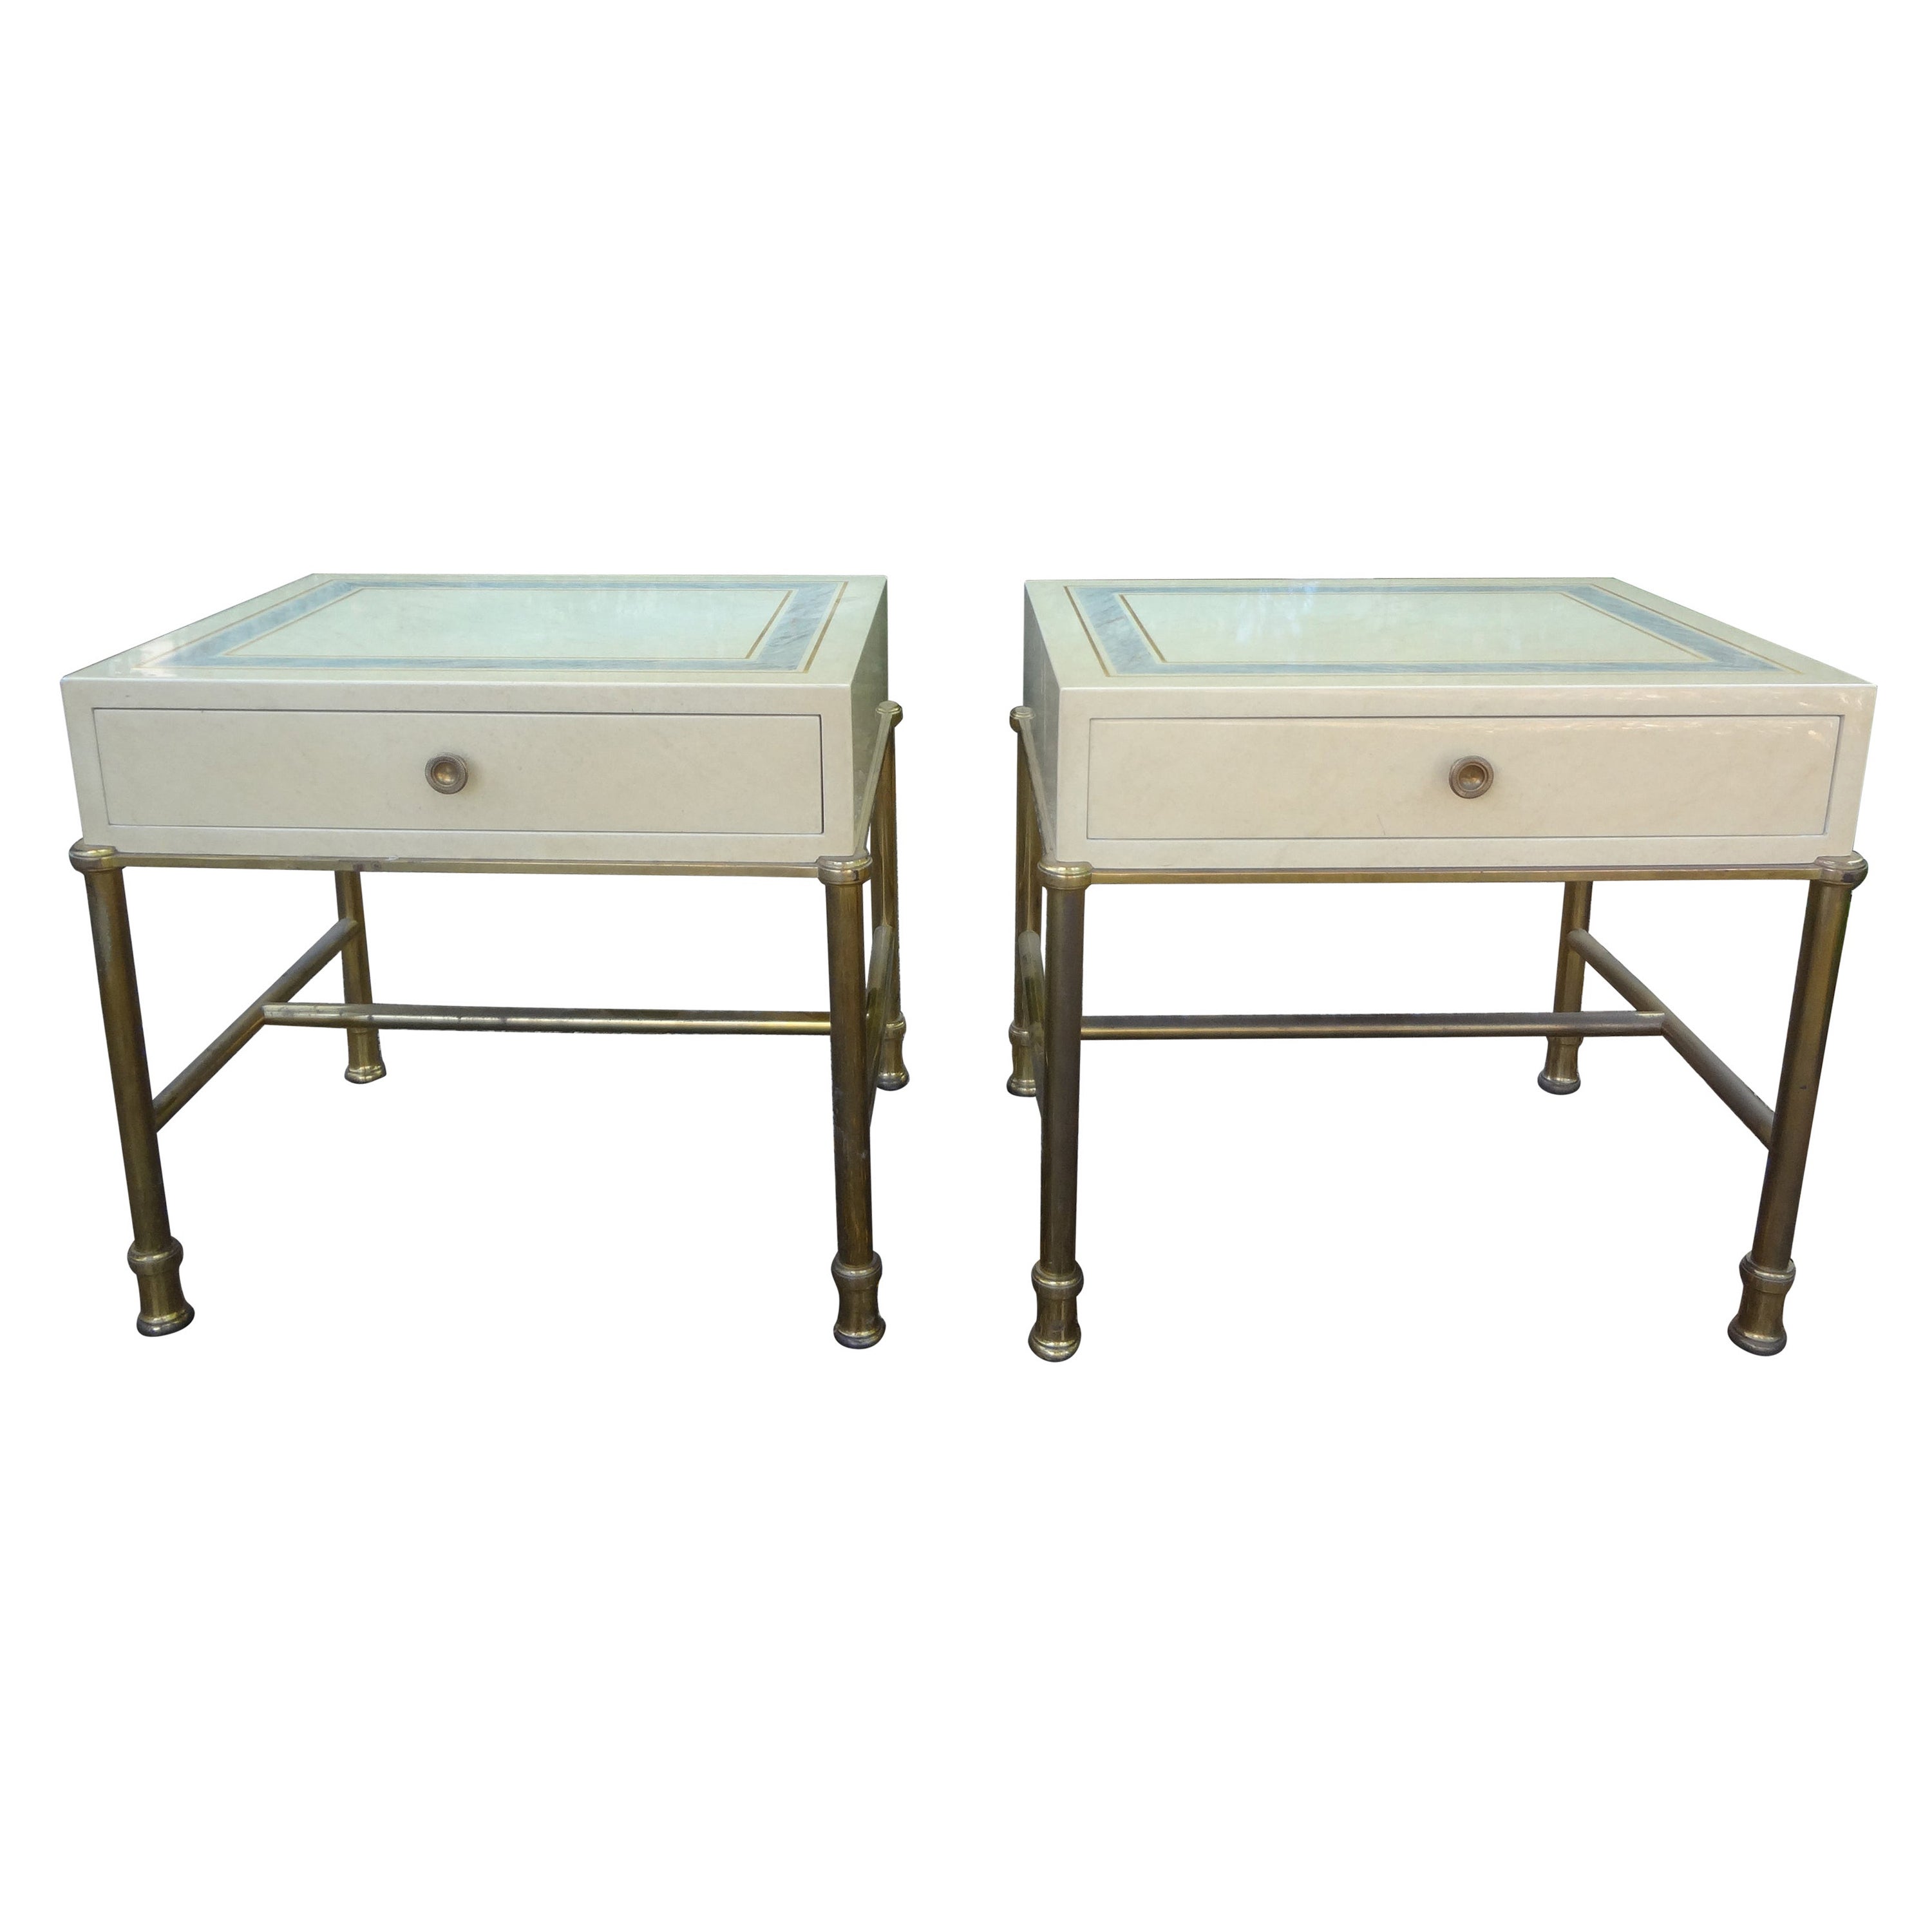 Pair of Italian Modern Brass and Lacquered Tables Attributed to Willy Rizzo For Sale